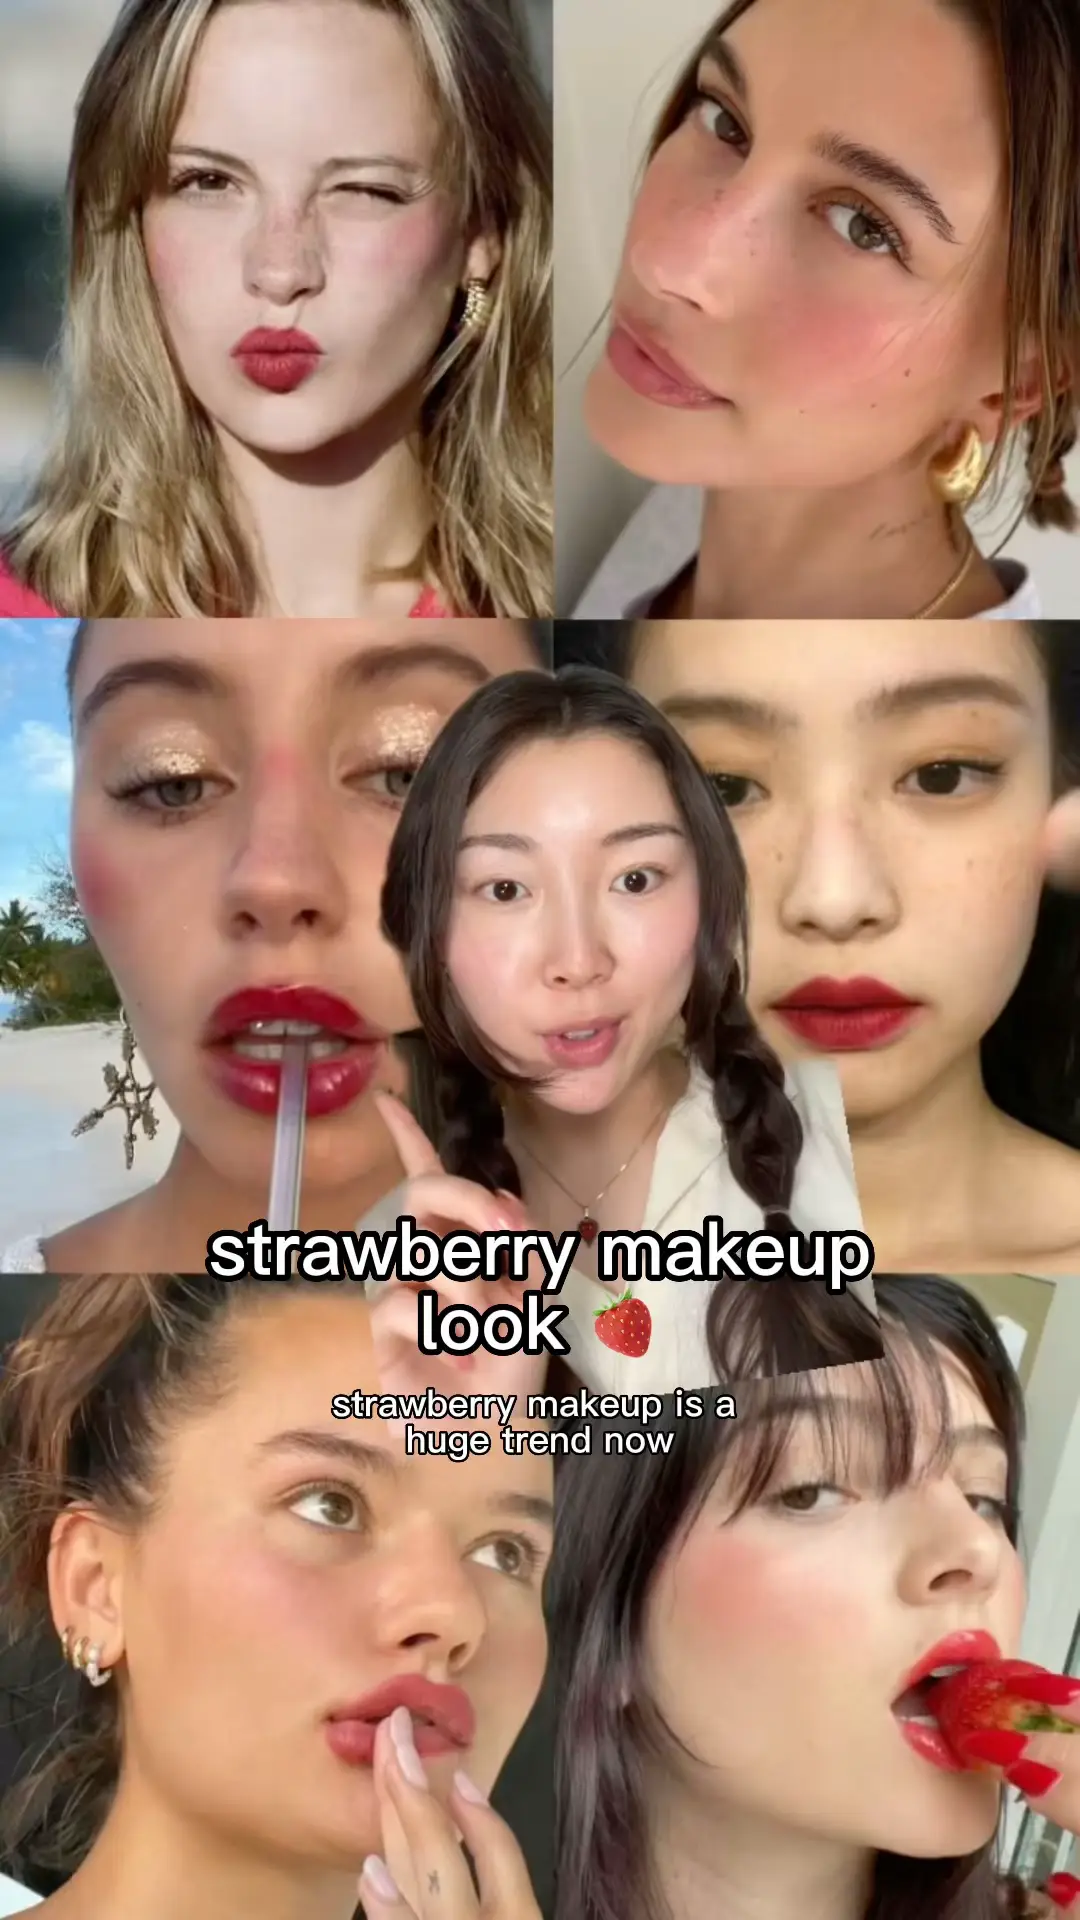 strawberry makeup trend!!🍓's images